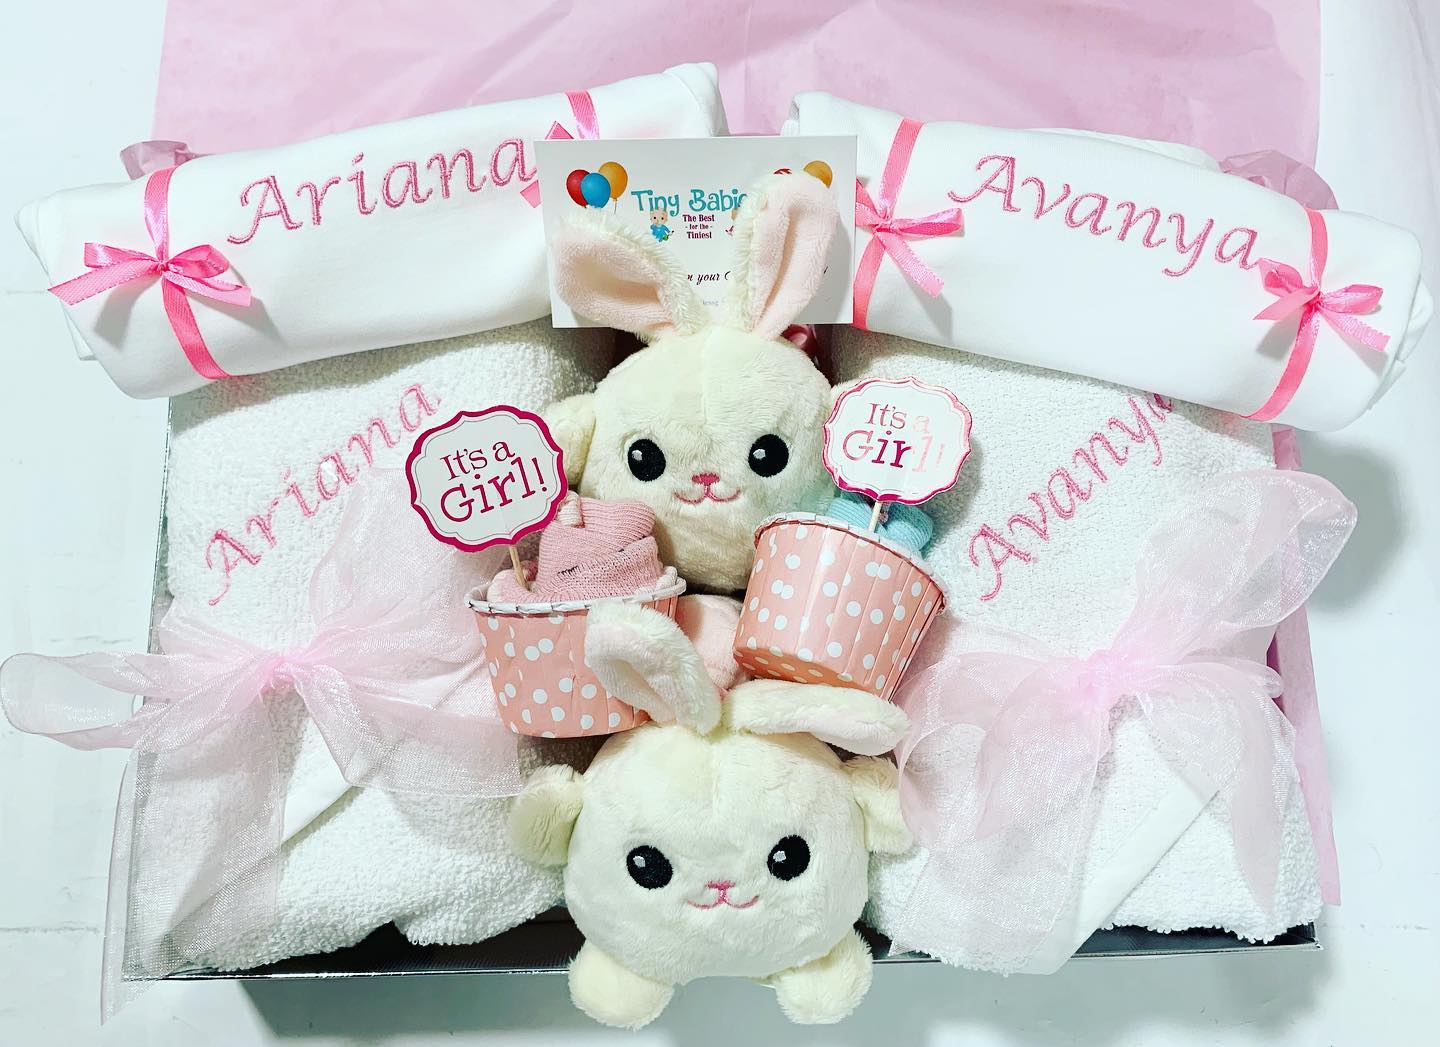 Customised baby gifts - Hampers for twins